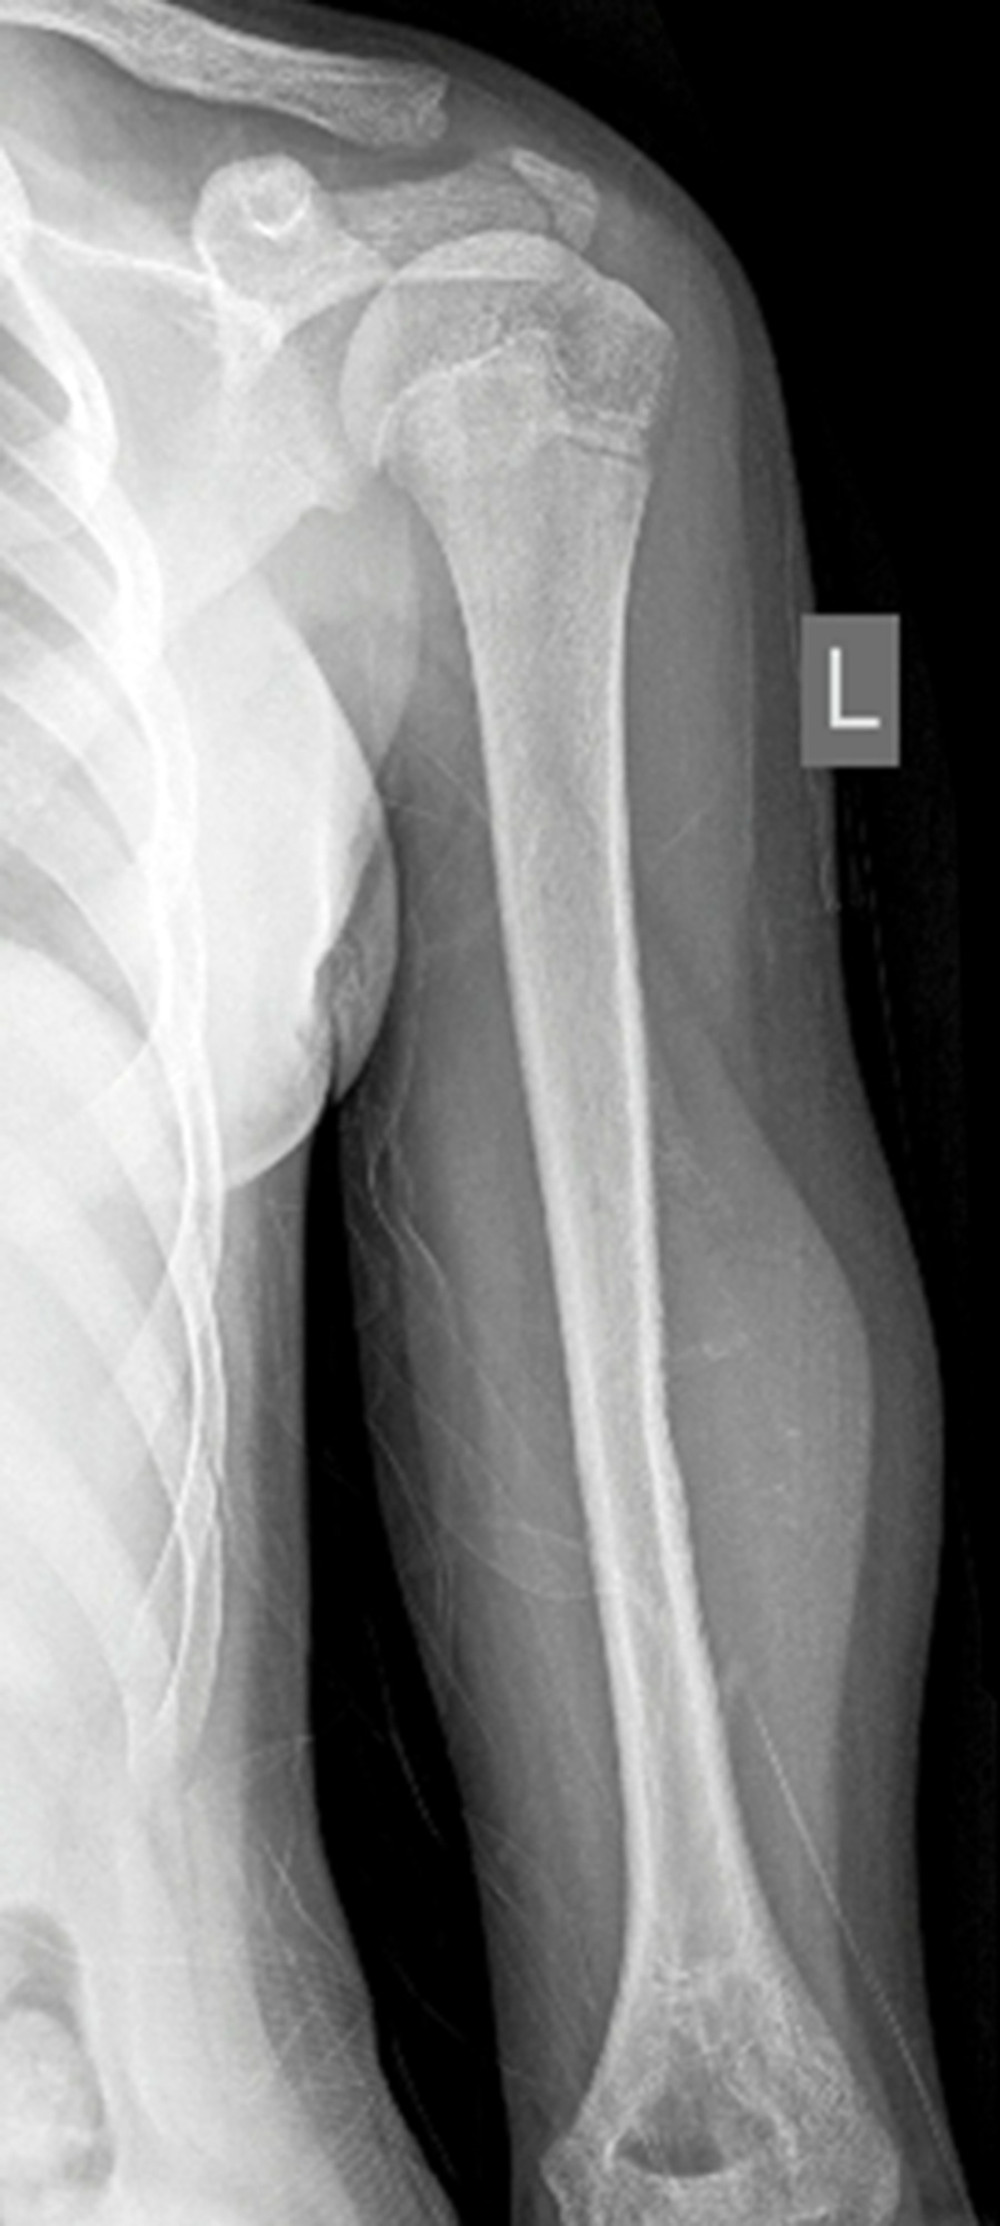 Plain radiograph of left humerus showing a soft tissue swelling with irregular cortex and periosteal reaction.